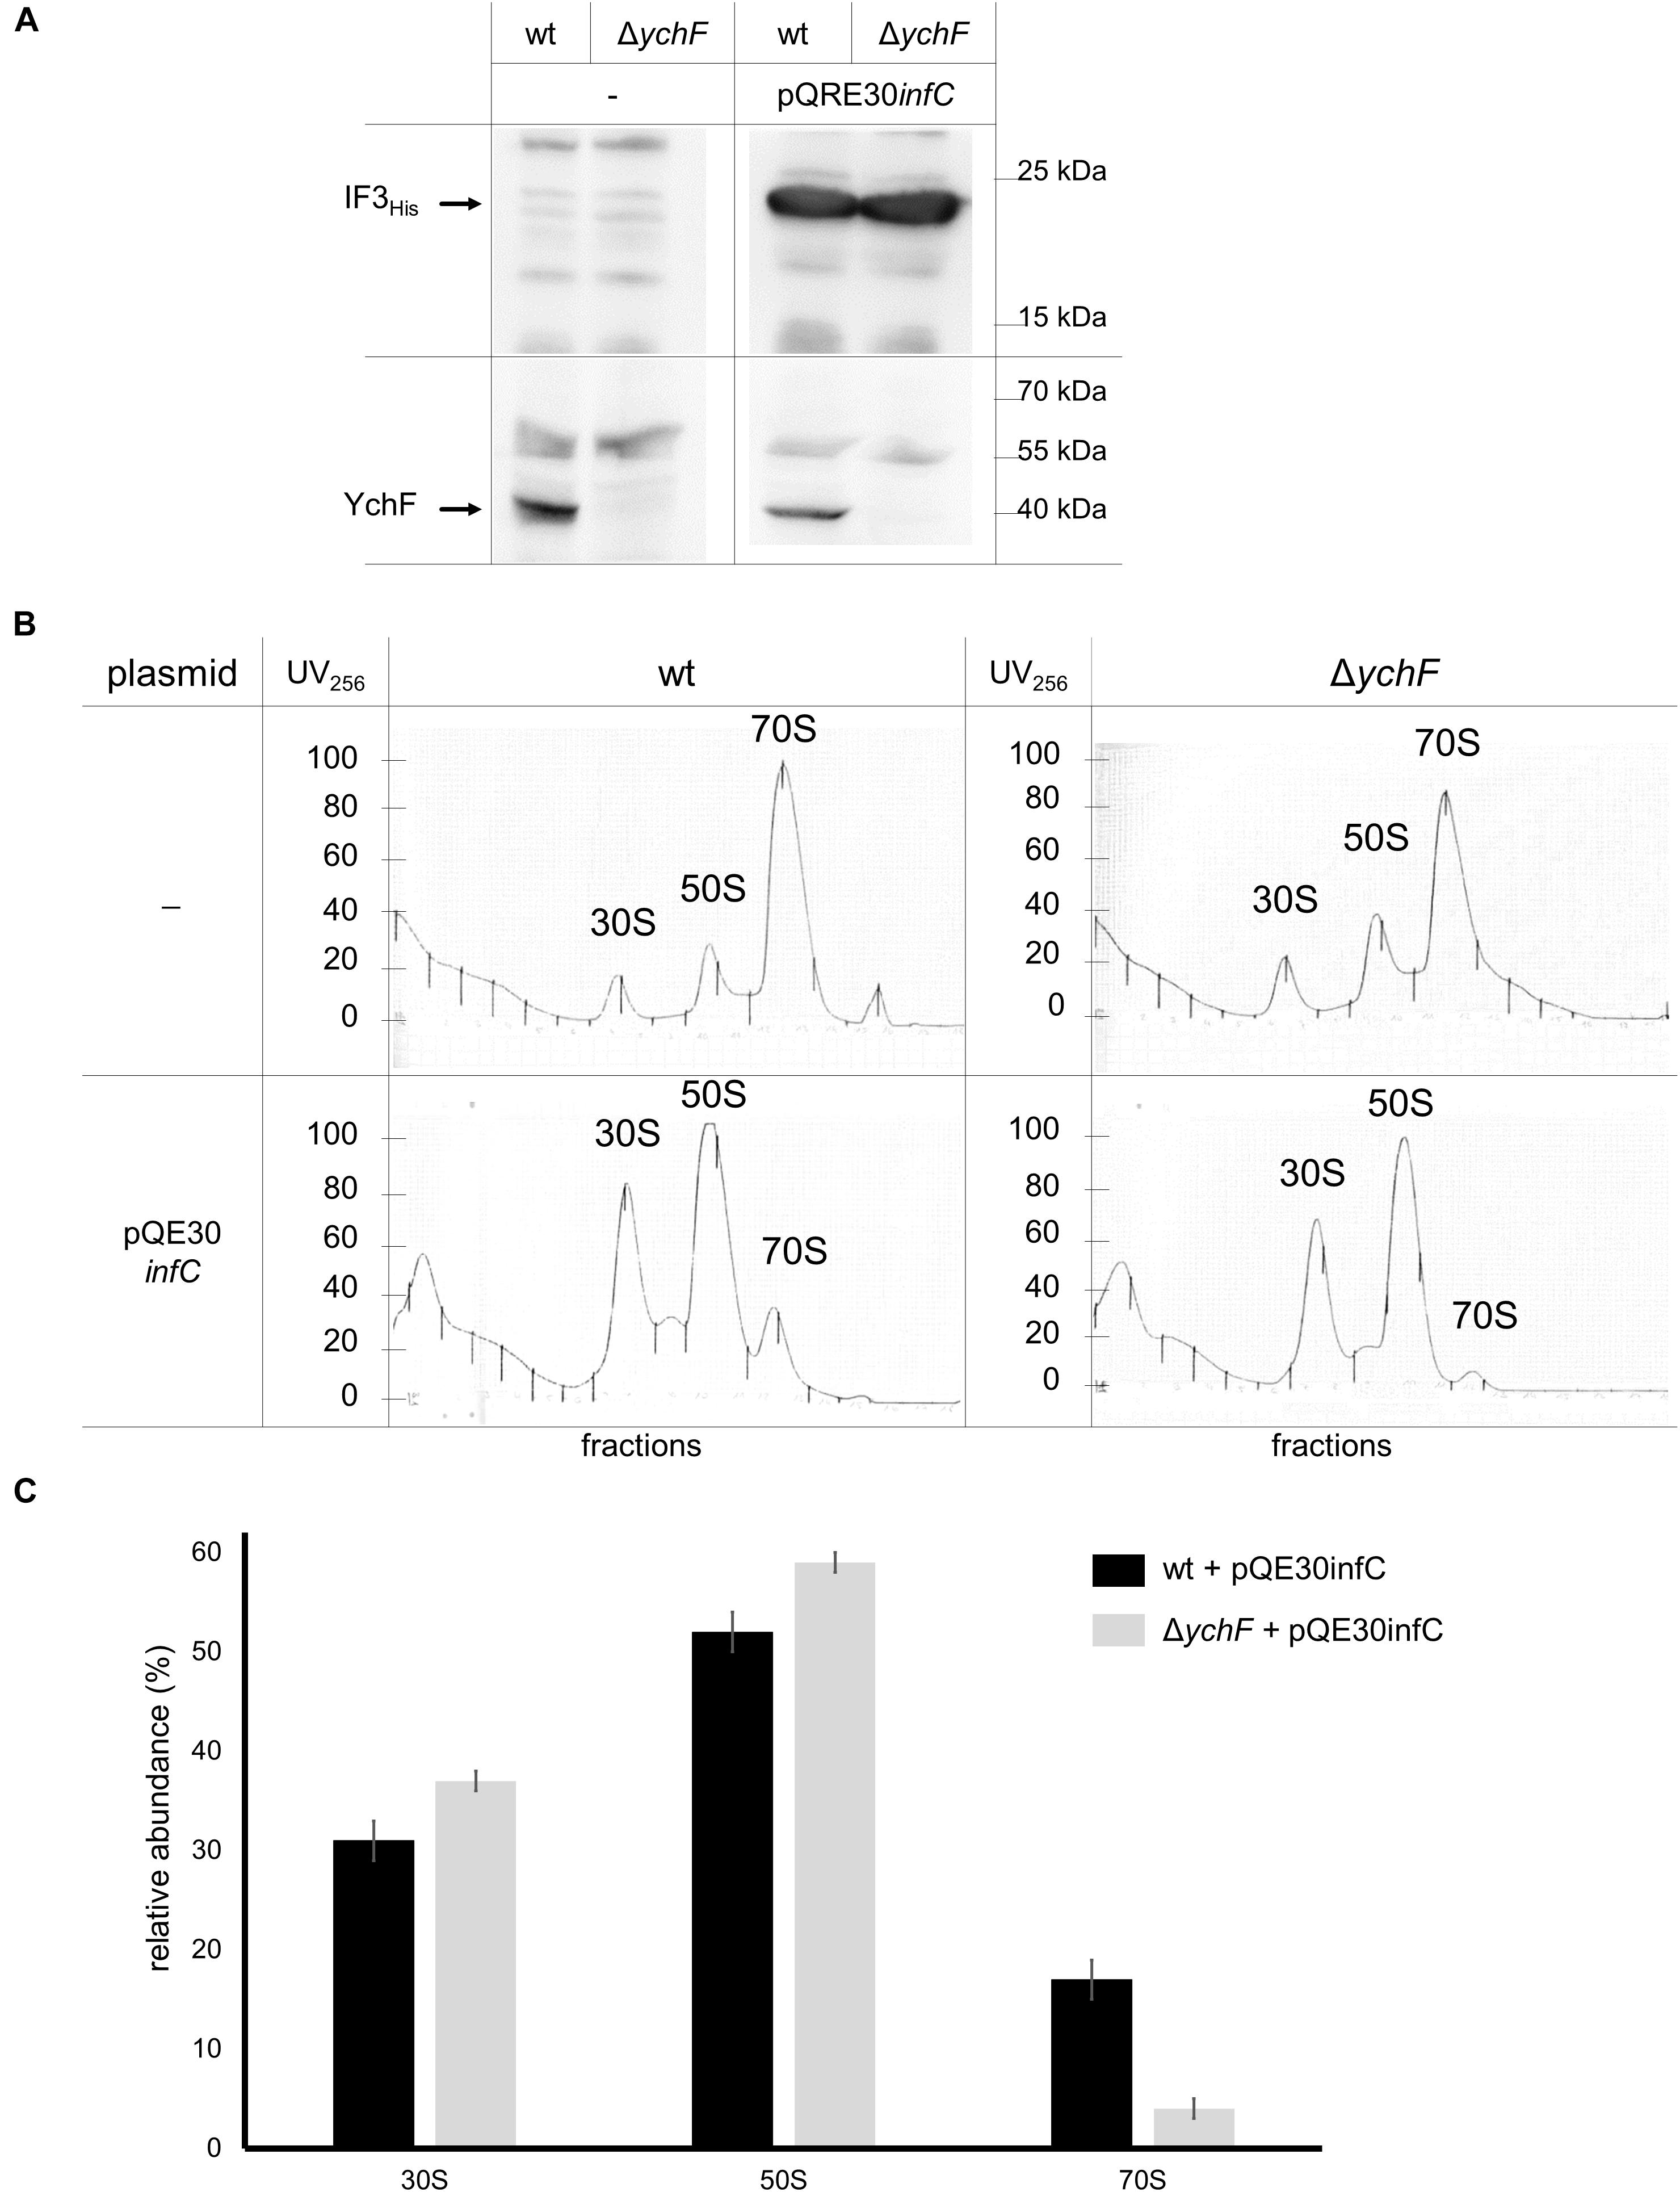 Frontiers The Universally Conserved Atpase Ychf Regulates Translation Of Leaderless Mrna In Response To Stress Conditions Molecular Biosciences